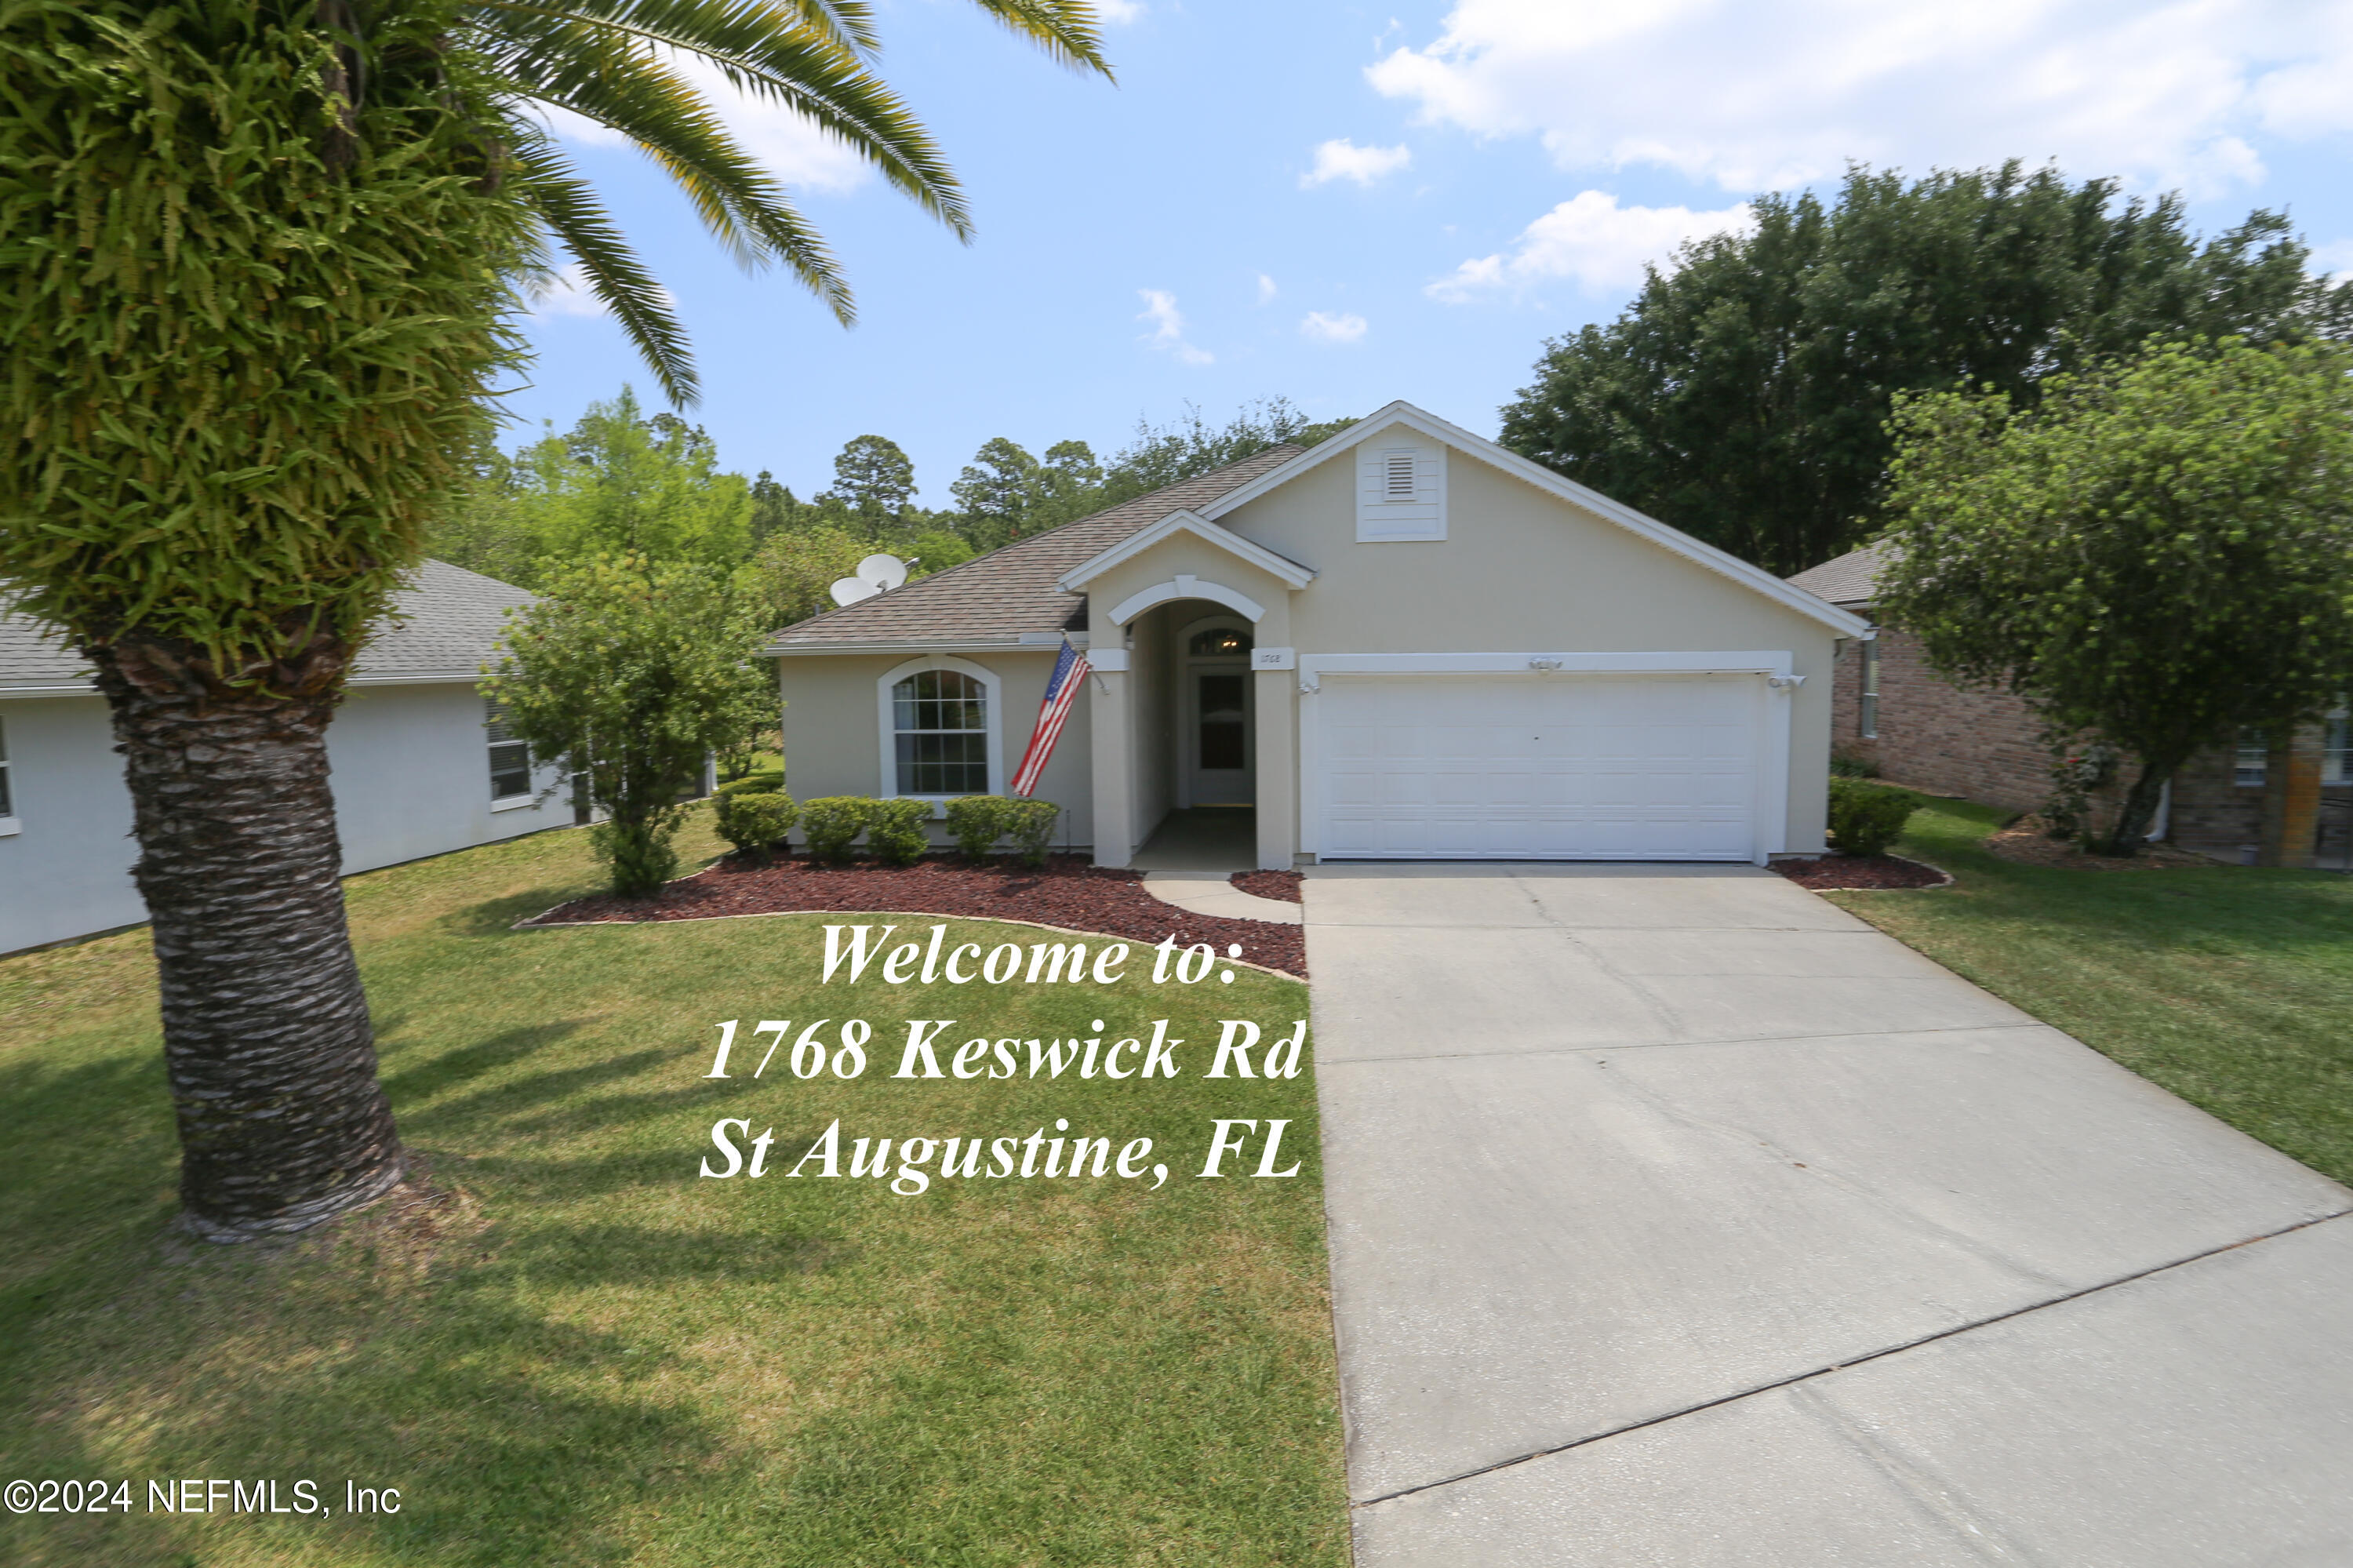 St Augustine, FL home for sale located at 1768 Keswick Road, St Augustine, FL 32084